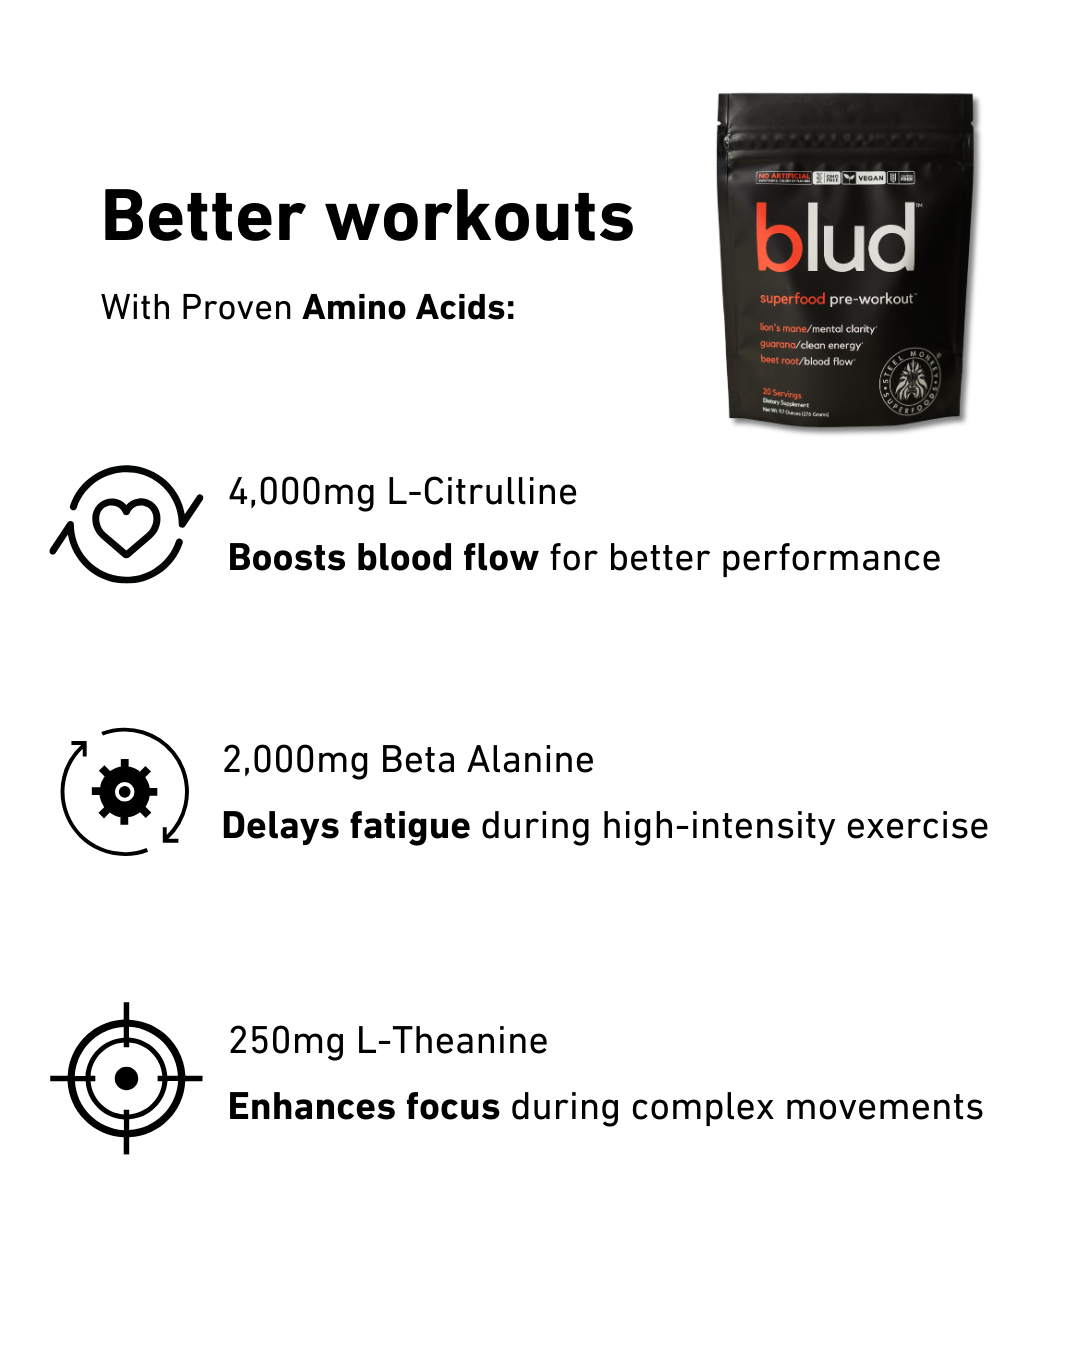 blud superfood pre-workout